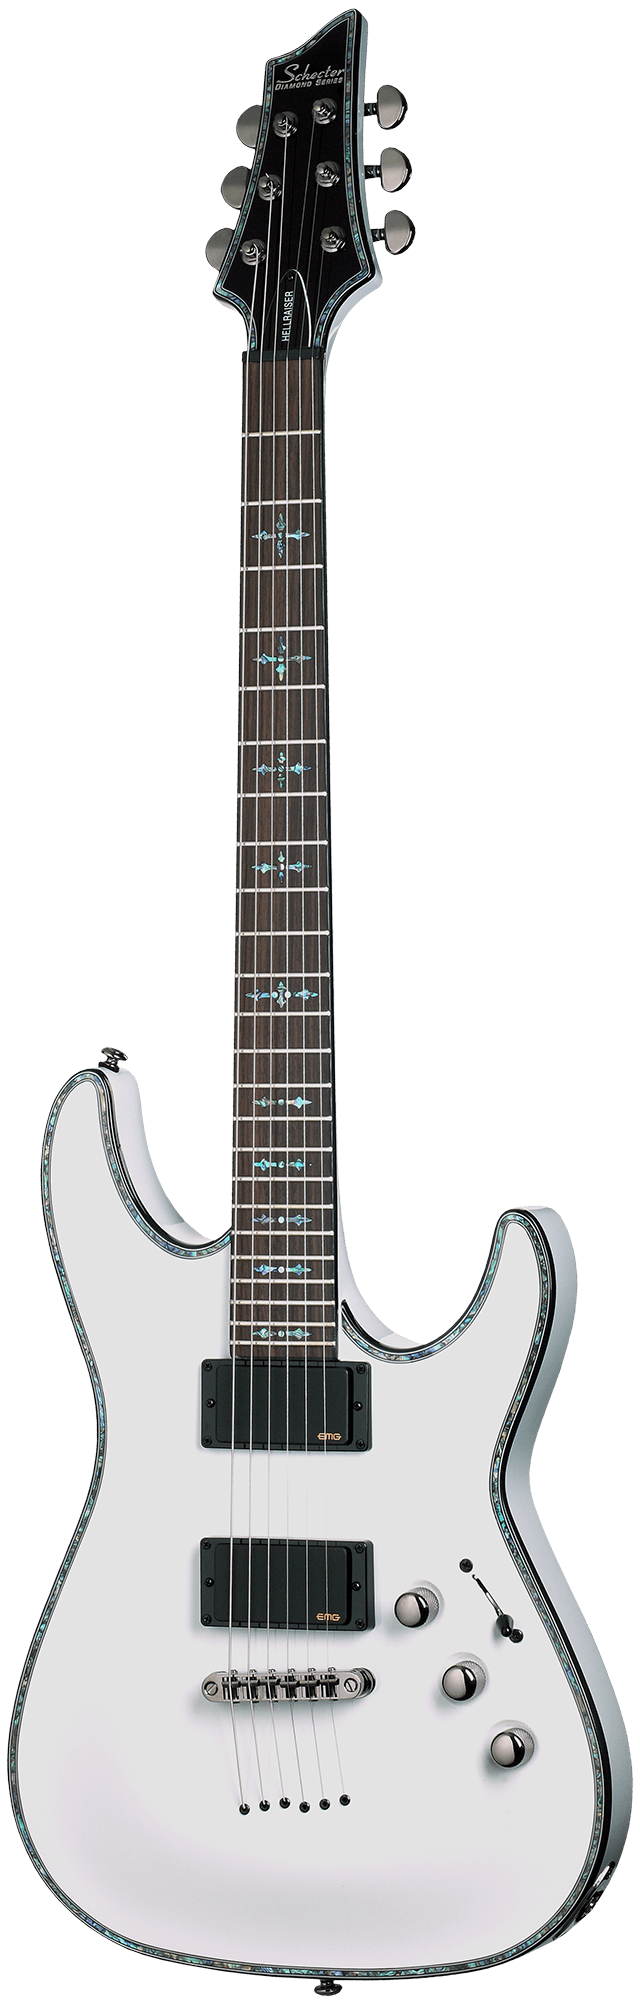 Schecter Hellraiser C-1 Electric Guitar in Gloss White - Andertons 